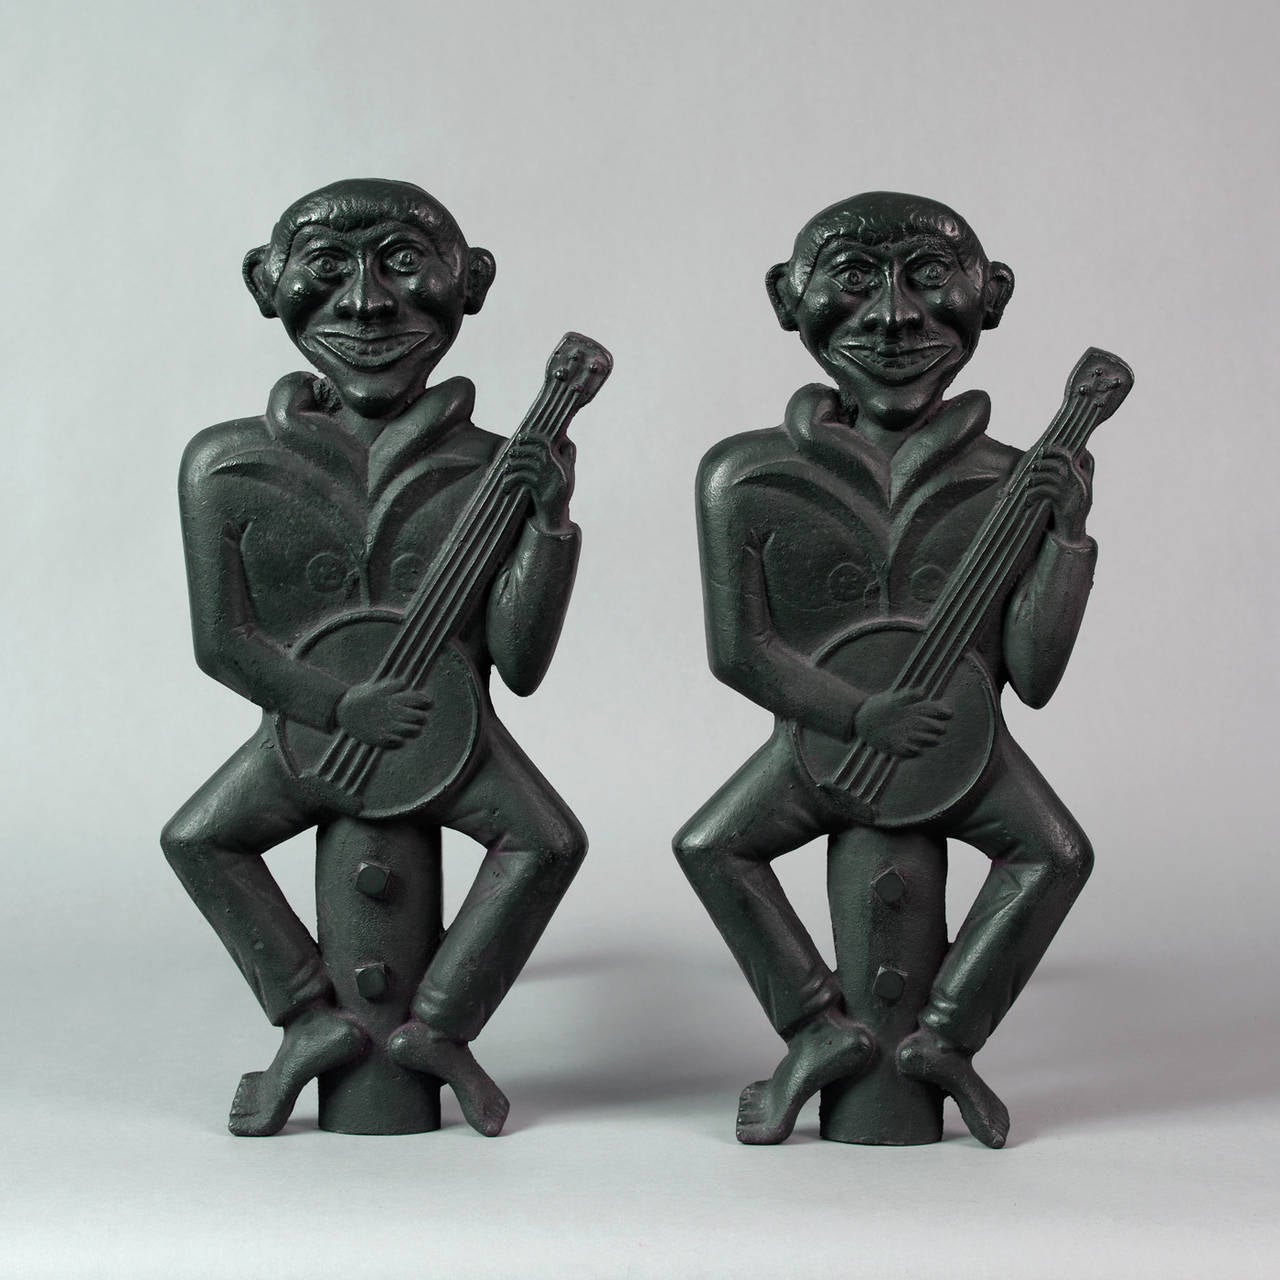 American, ca. 1870.
Cast iron painted black
Condition: Finely cast, replaced dogs
This pair of figural form andirons of two gentlemen,perhaps African-American, playing banjos are quite stylized and whimsical.